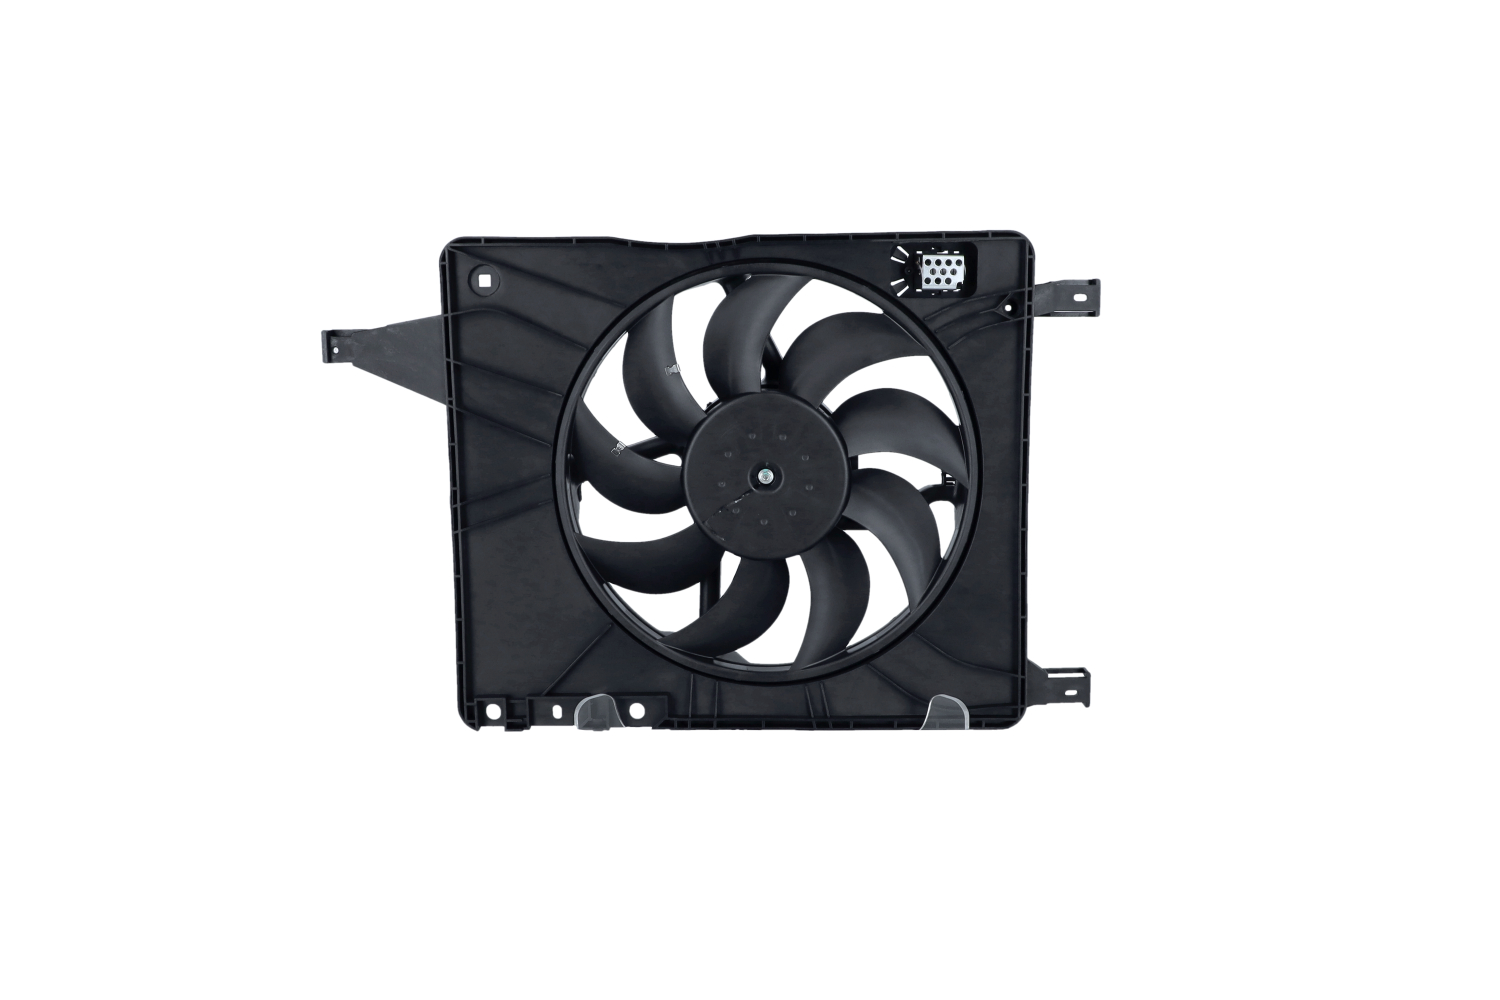 Original 470090 NRF Cooling fan experience and price